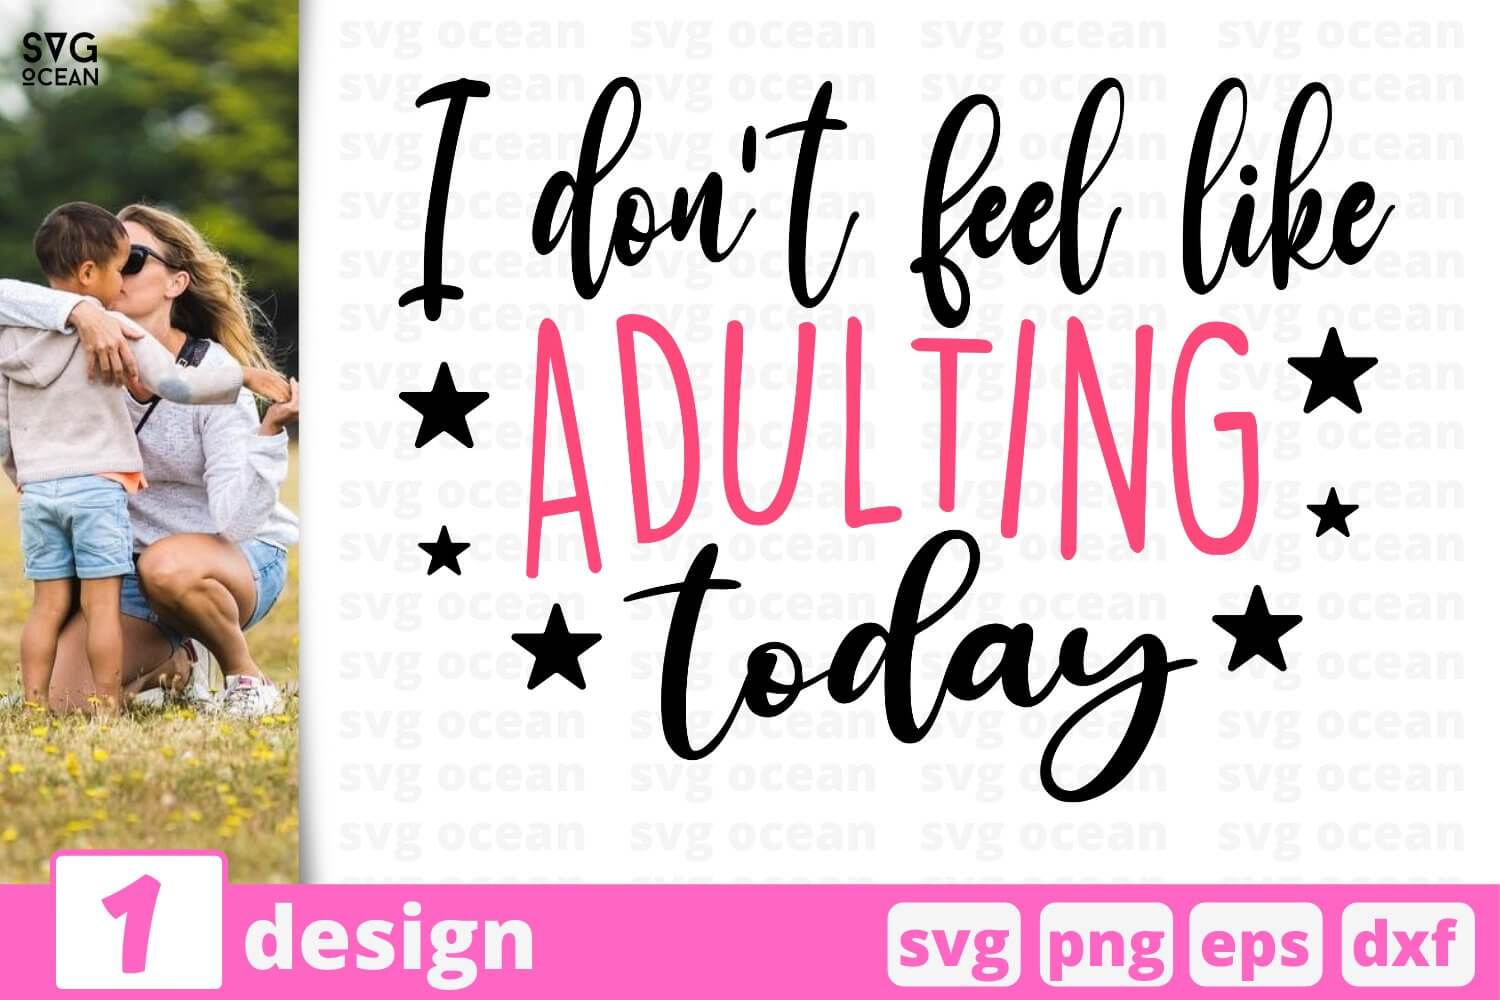 I Don't Feel Like Adulting Today.